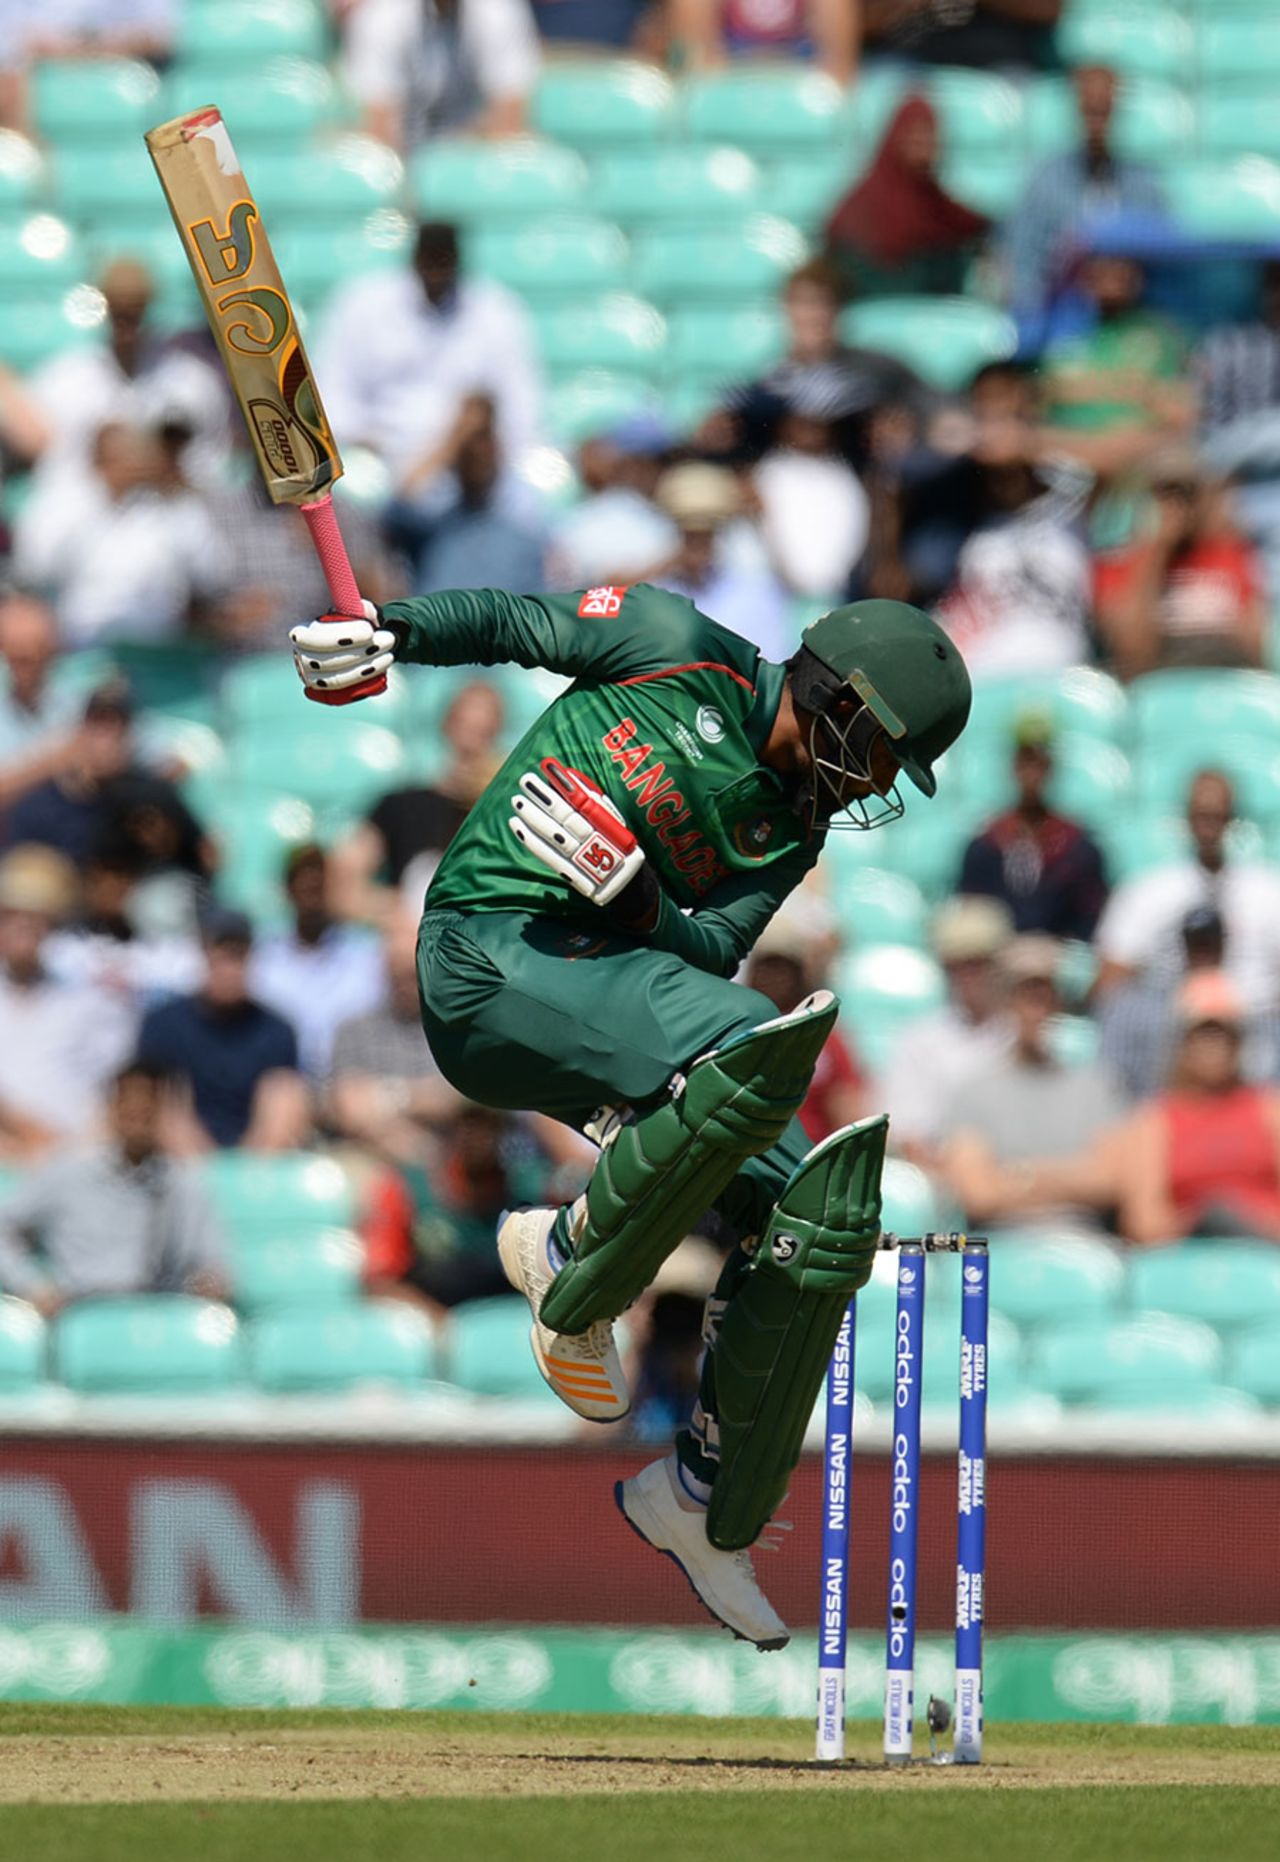 Tamim Iqbal got into a tangle against a short ball
, England v Bangladesh, Champions Trophy, Group A, The Oval, June 1, 2017